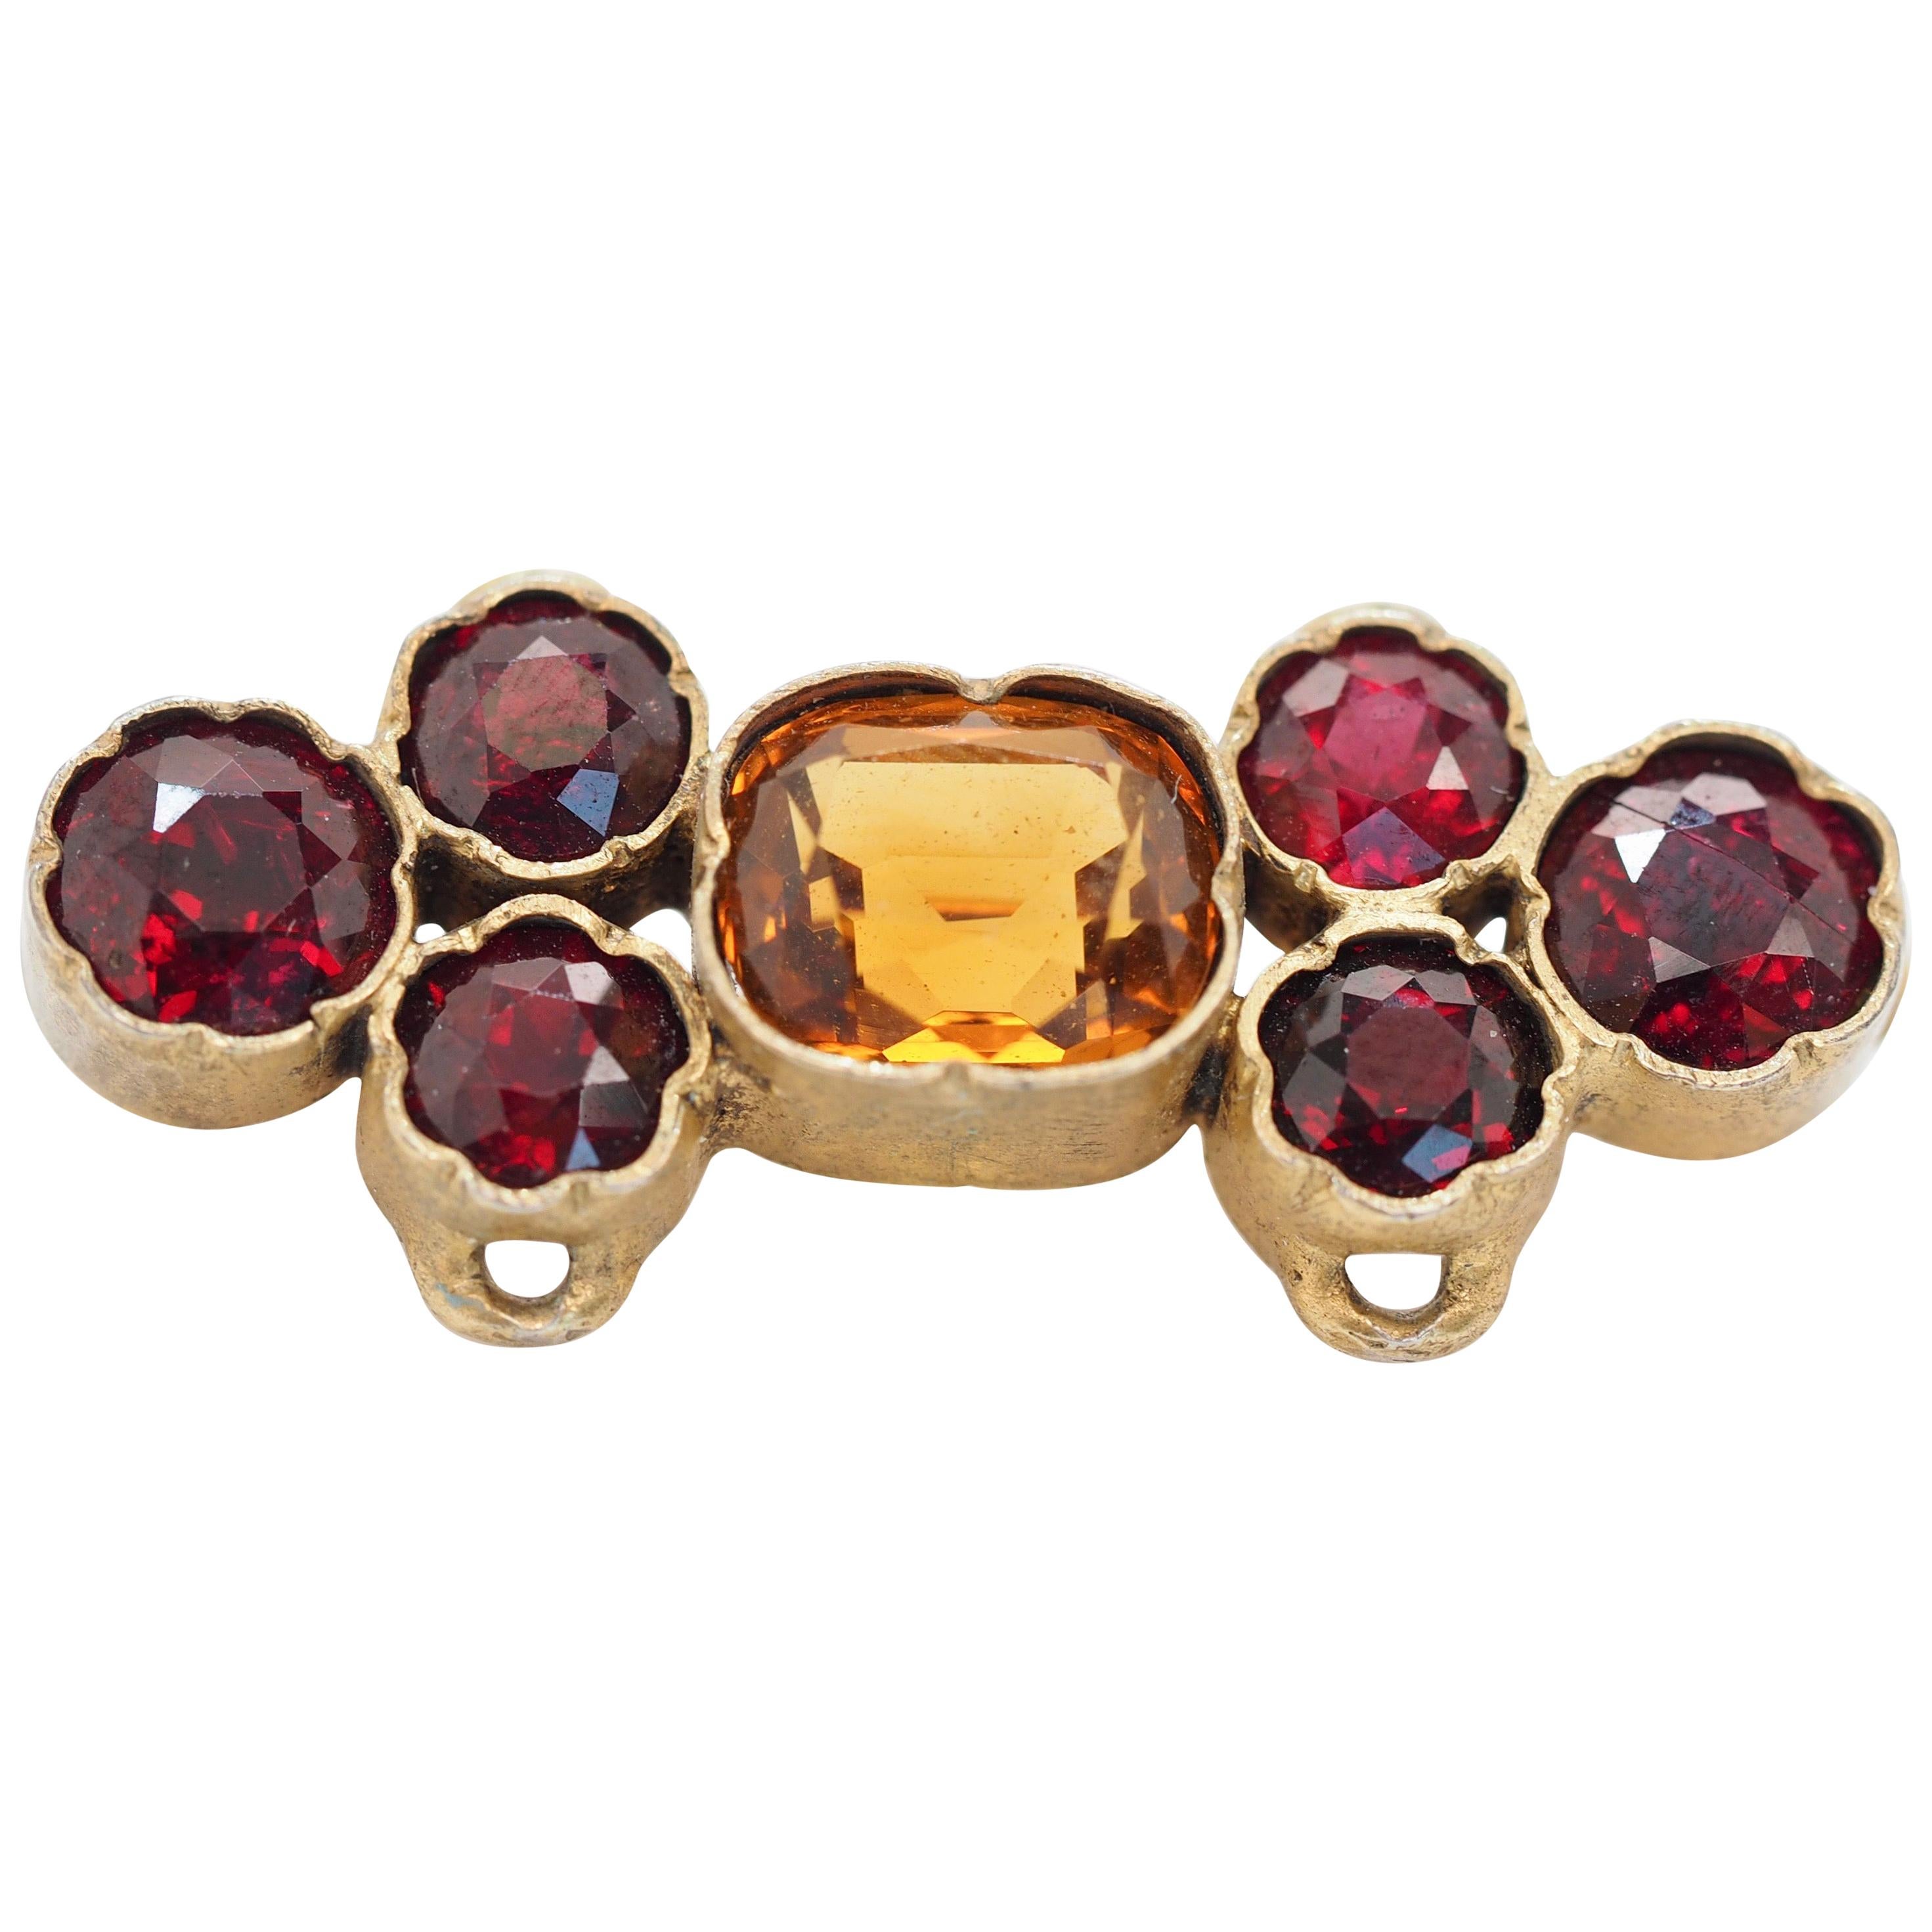 Retro Gold-Plated Brooch/Sliding Pendant with Citrine and Rhodolite Garnets